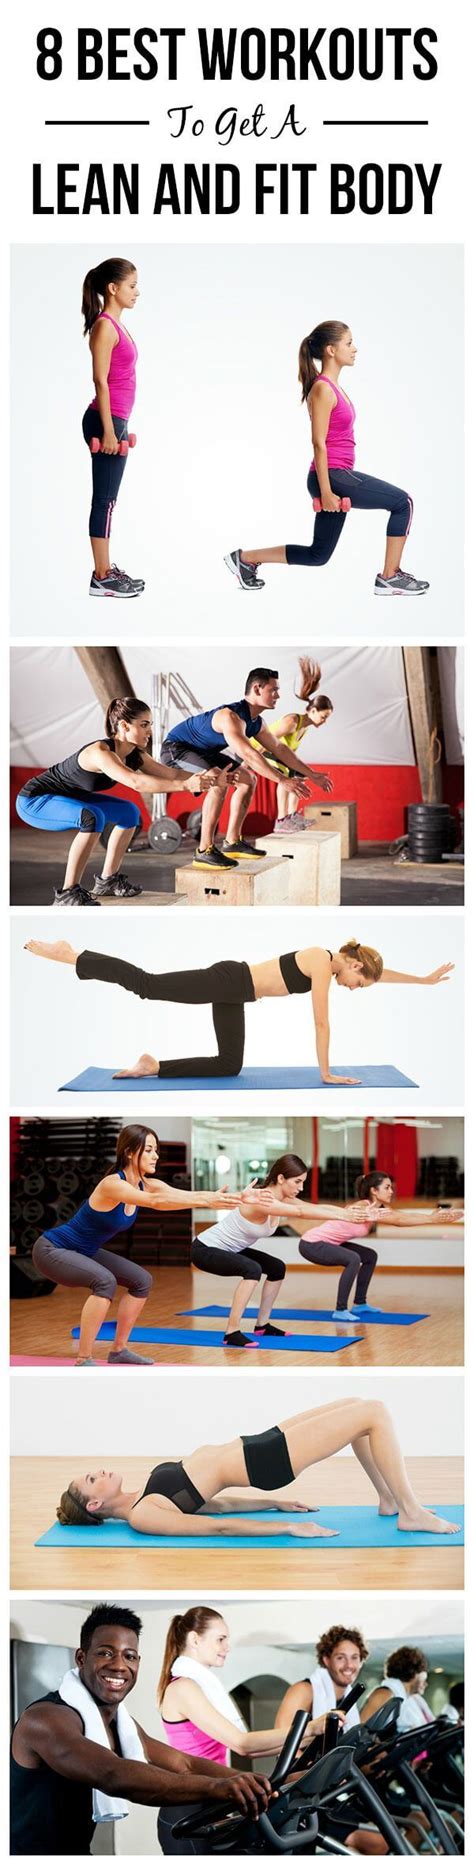 15 Best Workouts For Women To Get A Lean And Fit Body Fun Workouts